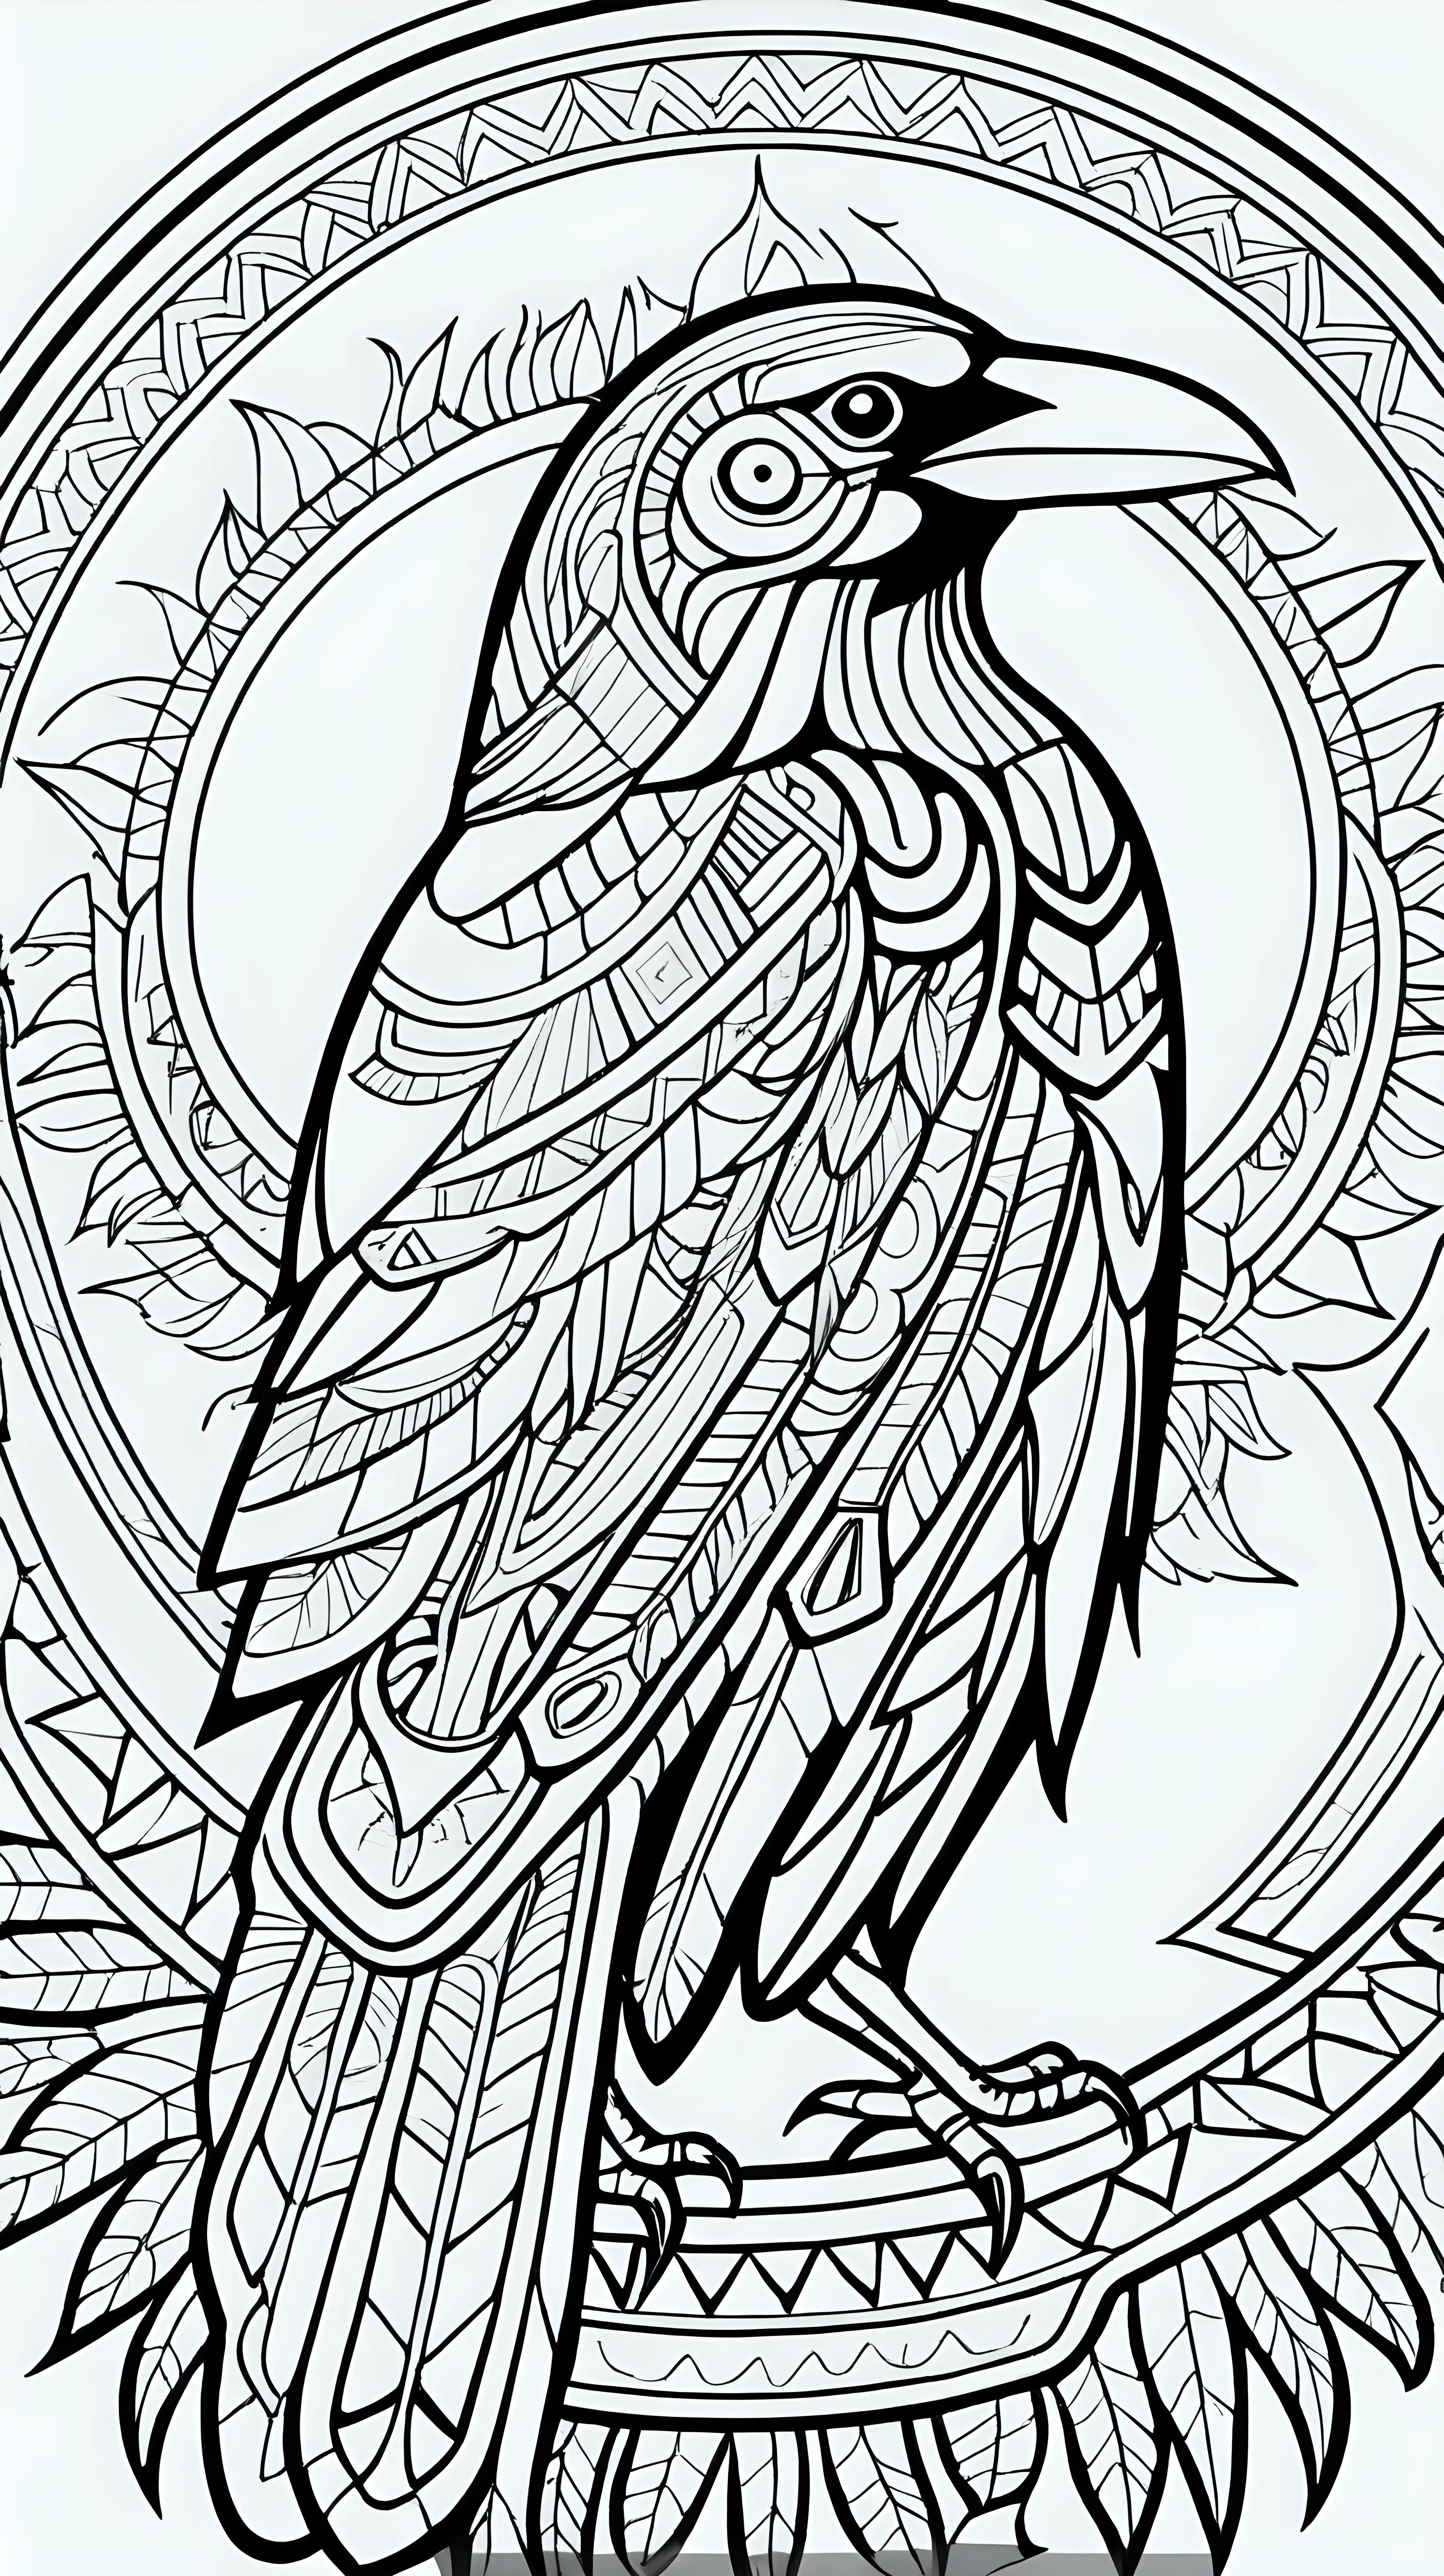 tribal crow mandala, coloring book image, thick black clean lines, native American Indian style